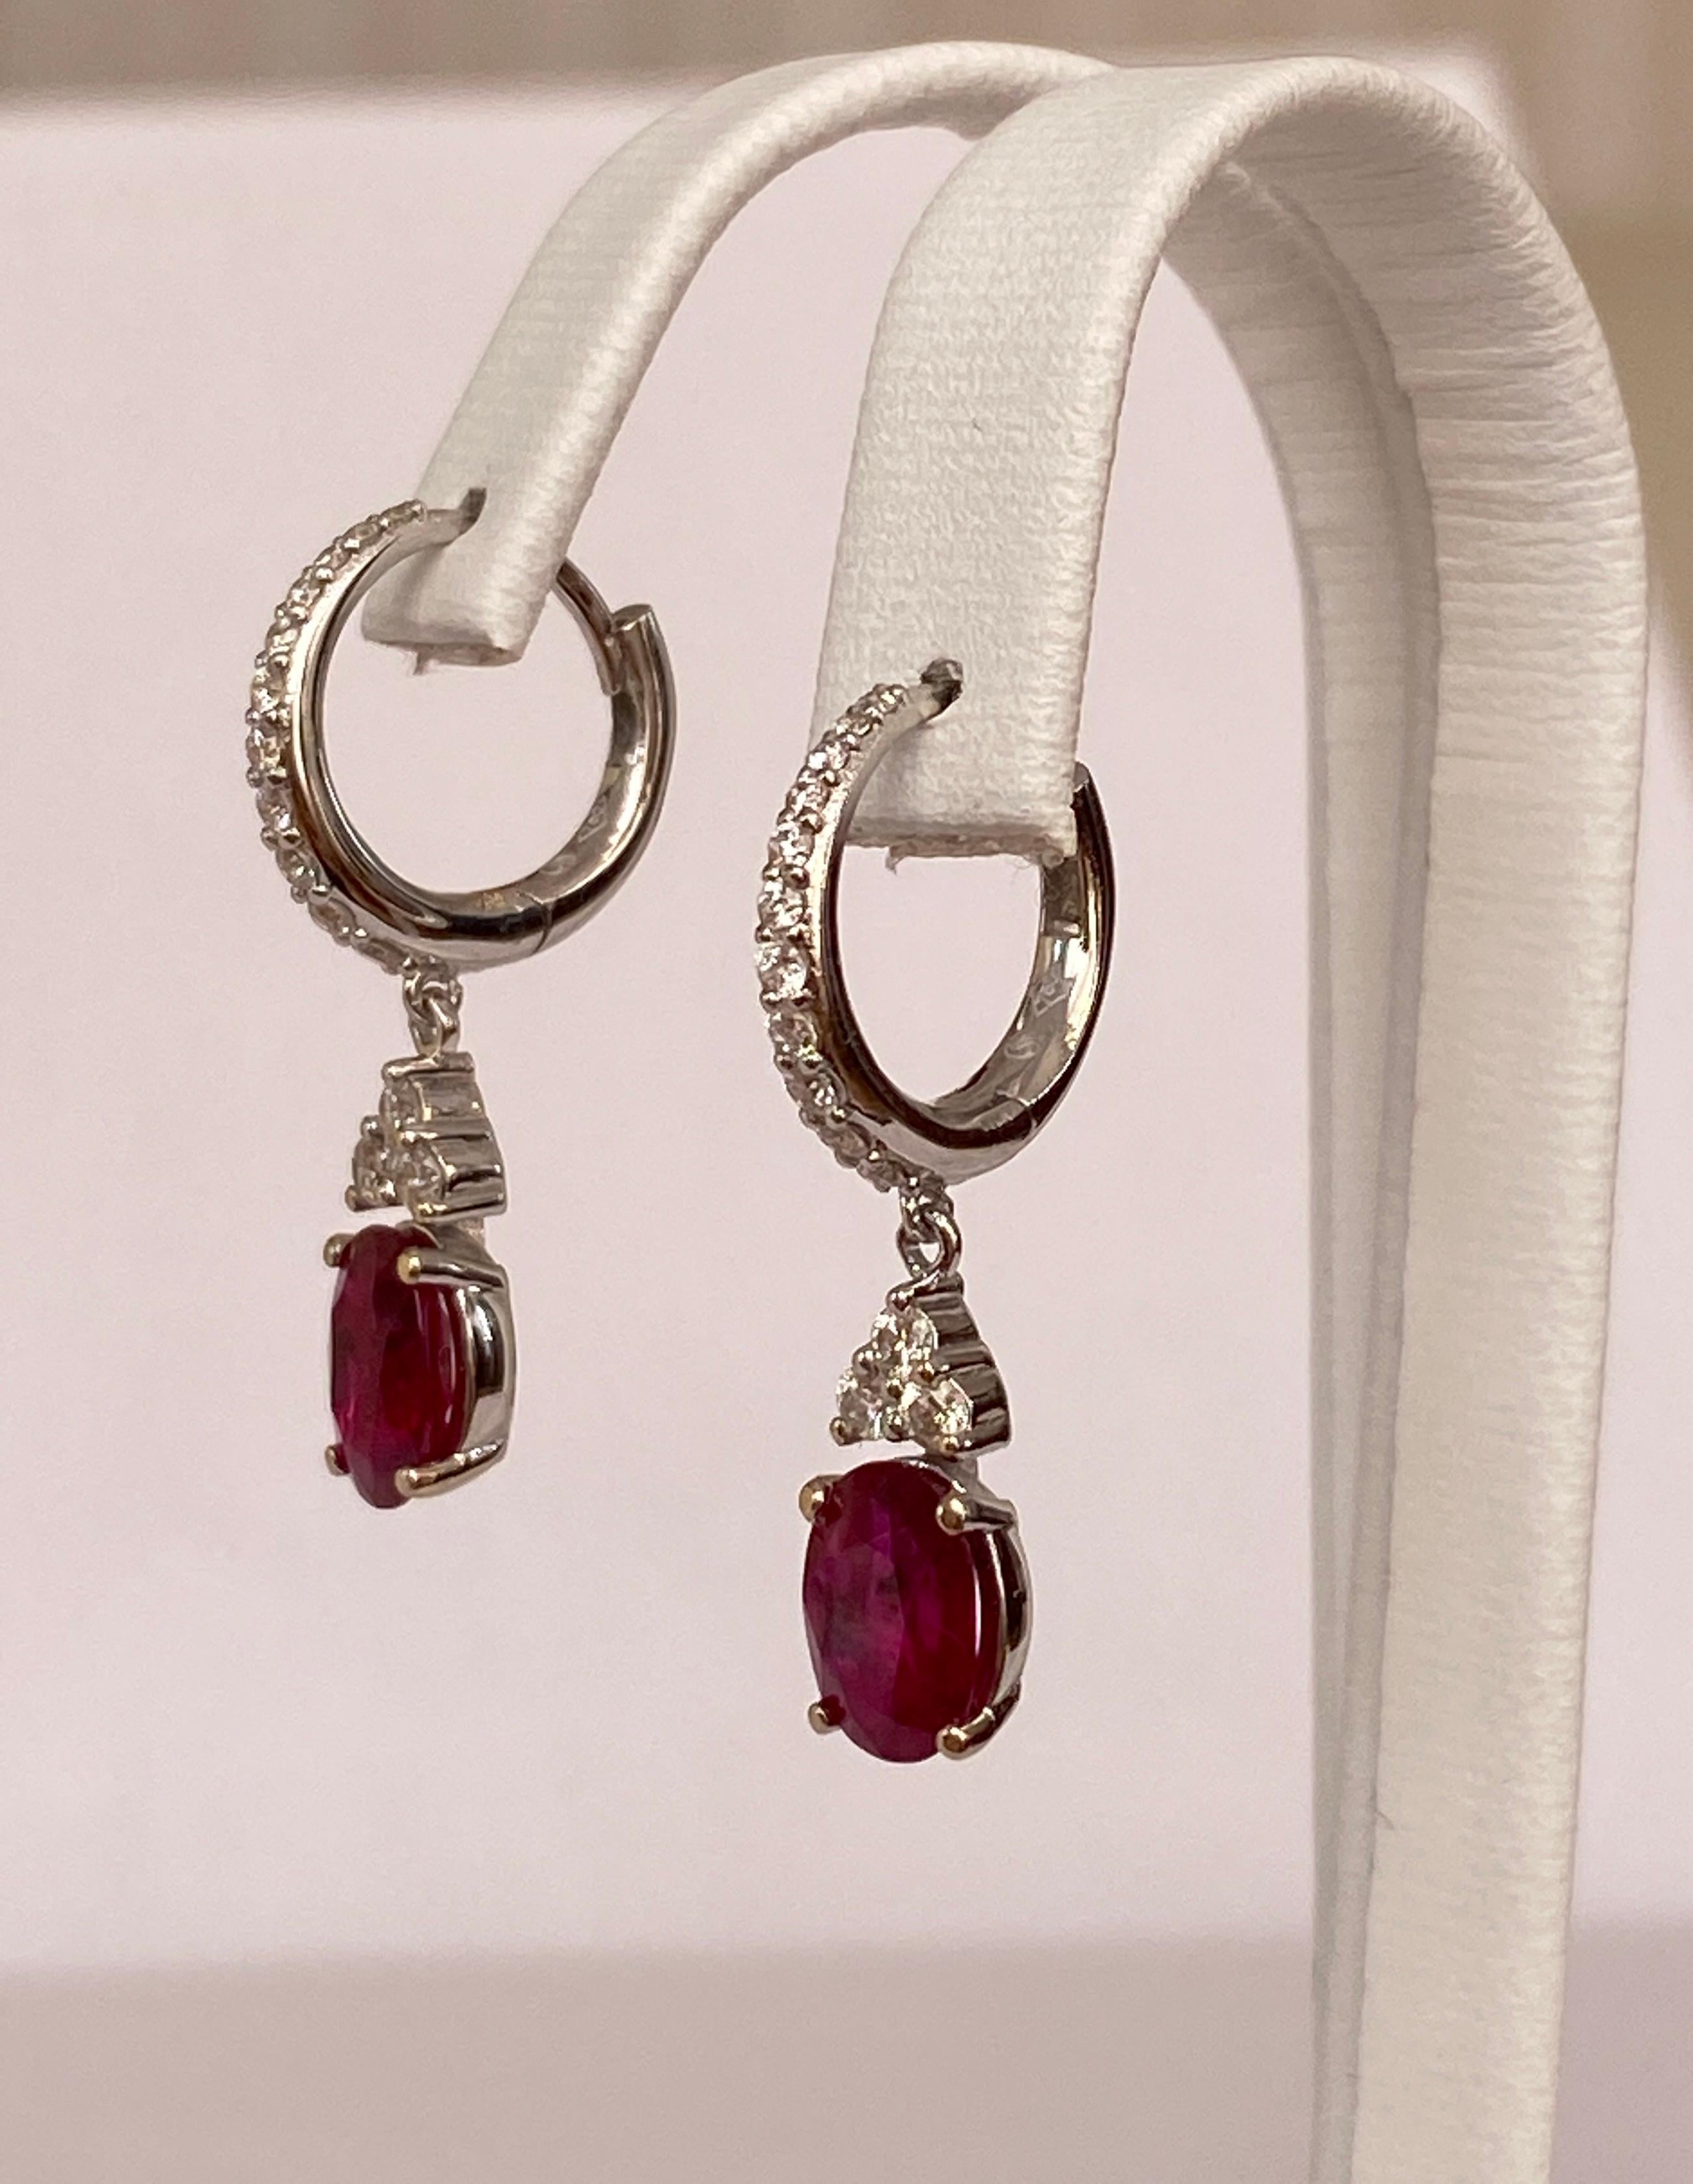 ALGT Certified 18 Kt. White Gold Earrings with 2.28 Ct Rubies and Diamonds For Sale 4